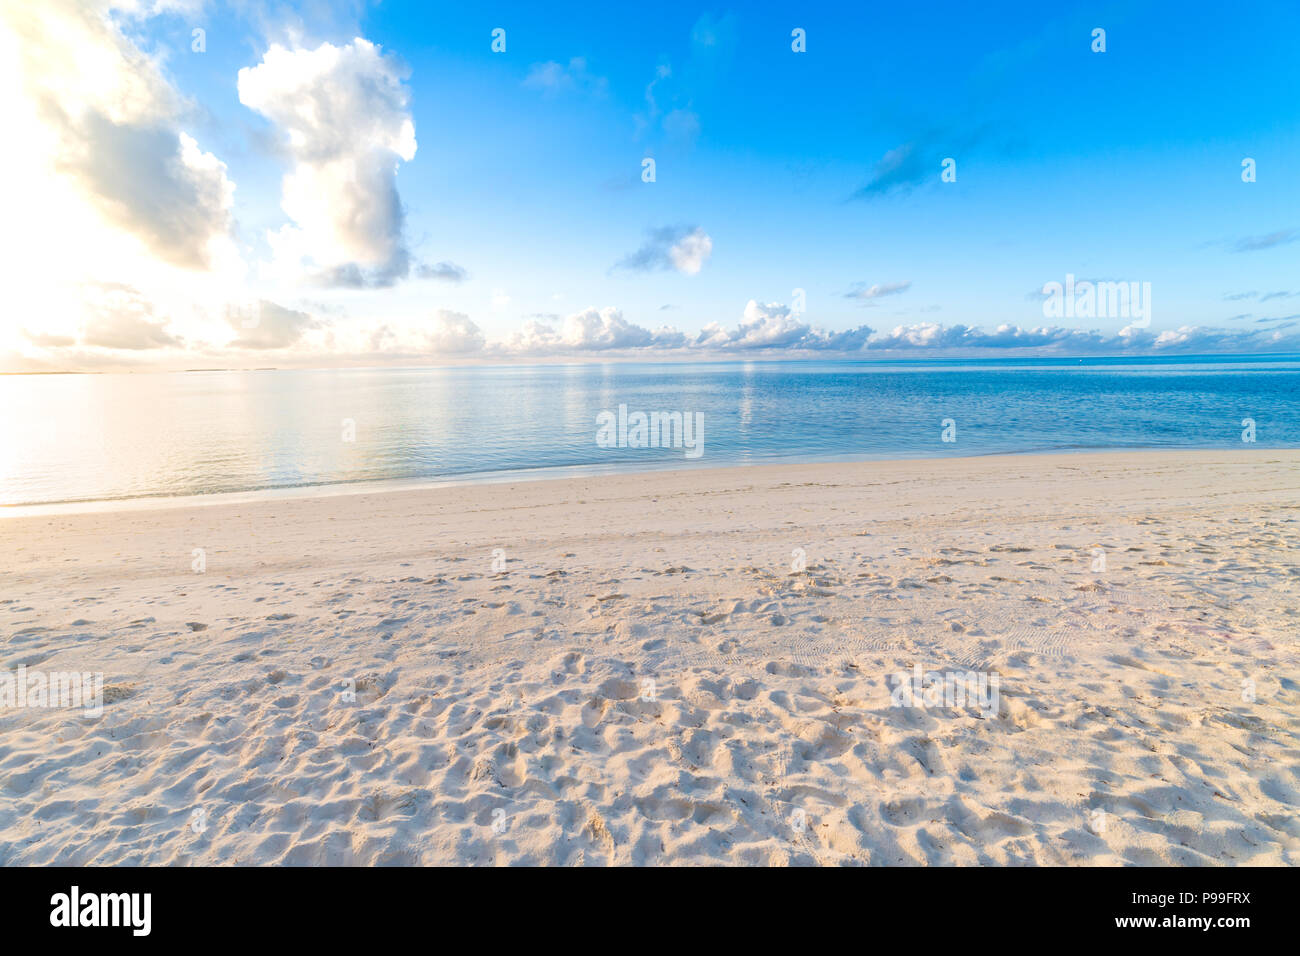 Tranquil tropical beach, empty sand with sea view Stock Photo